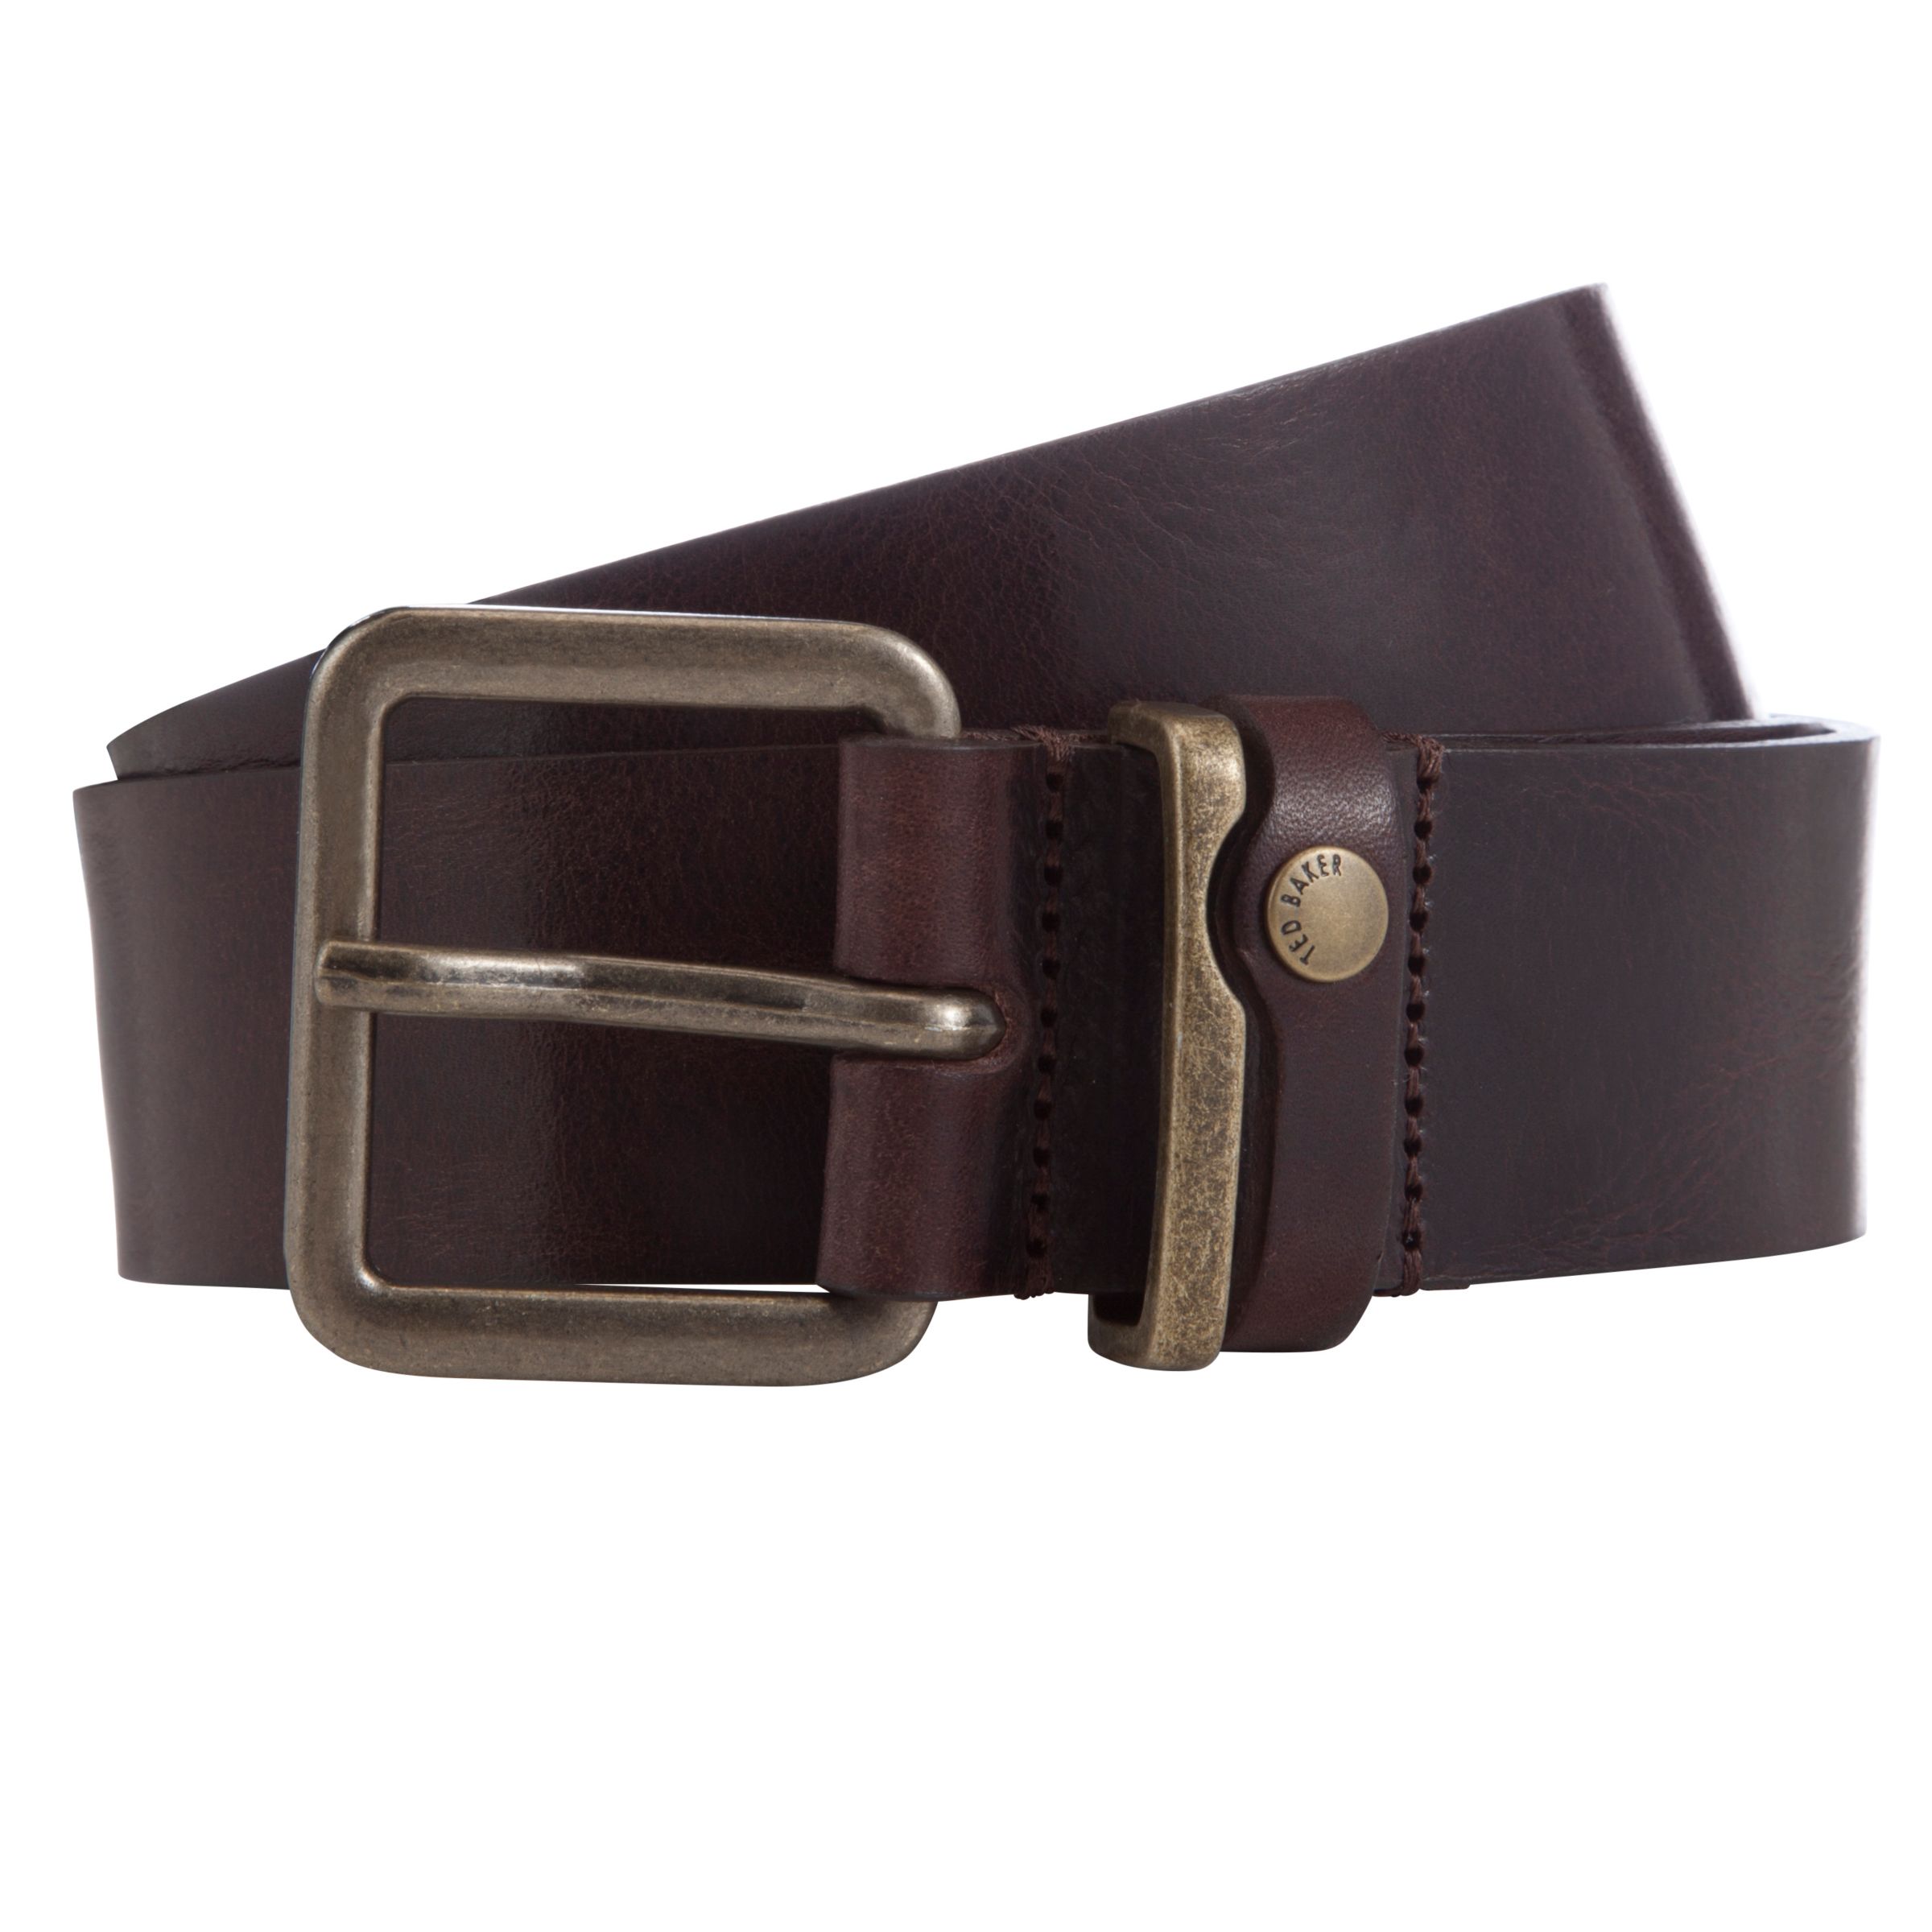 Ted Baker Katchup Leather Belt, Chocolate